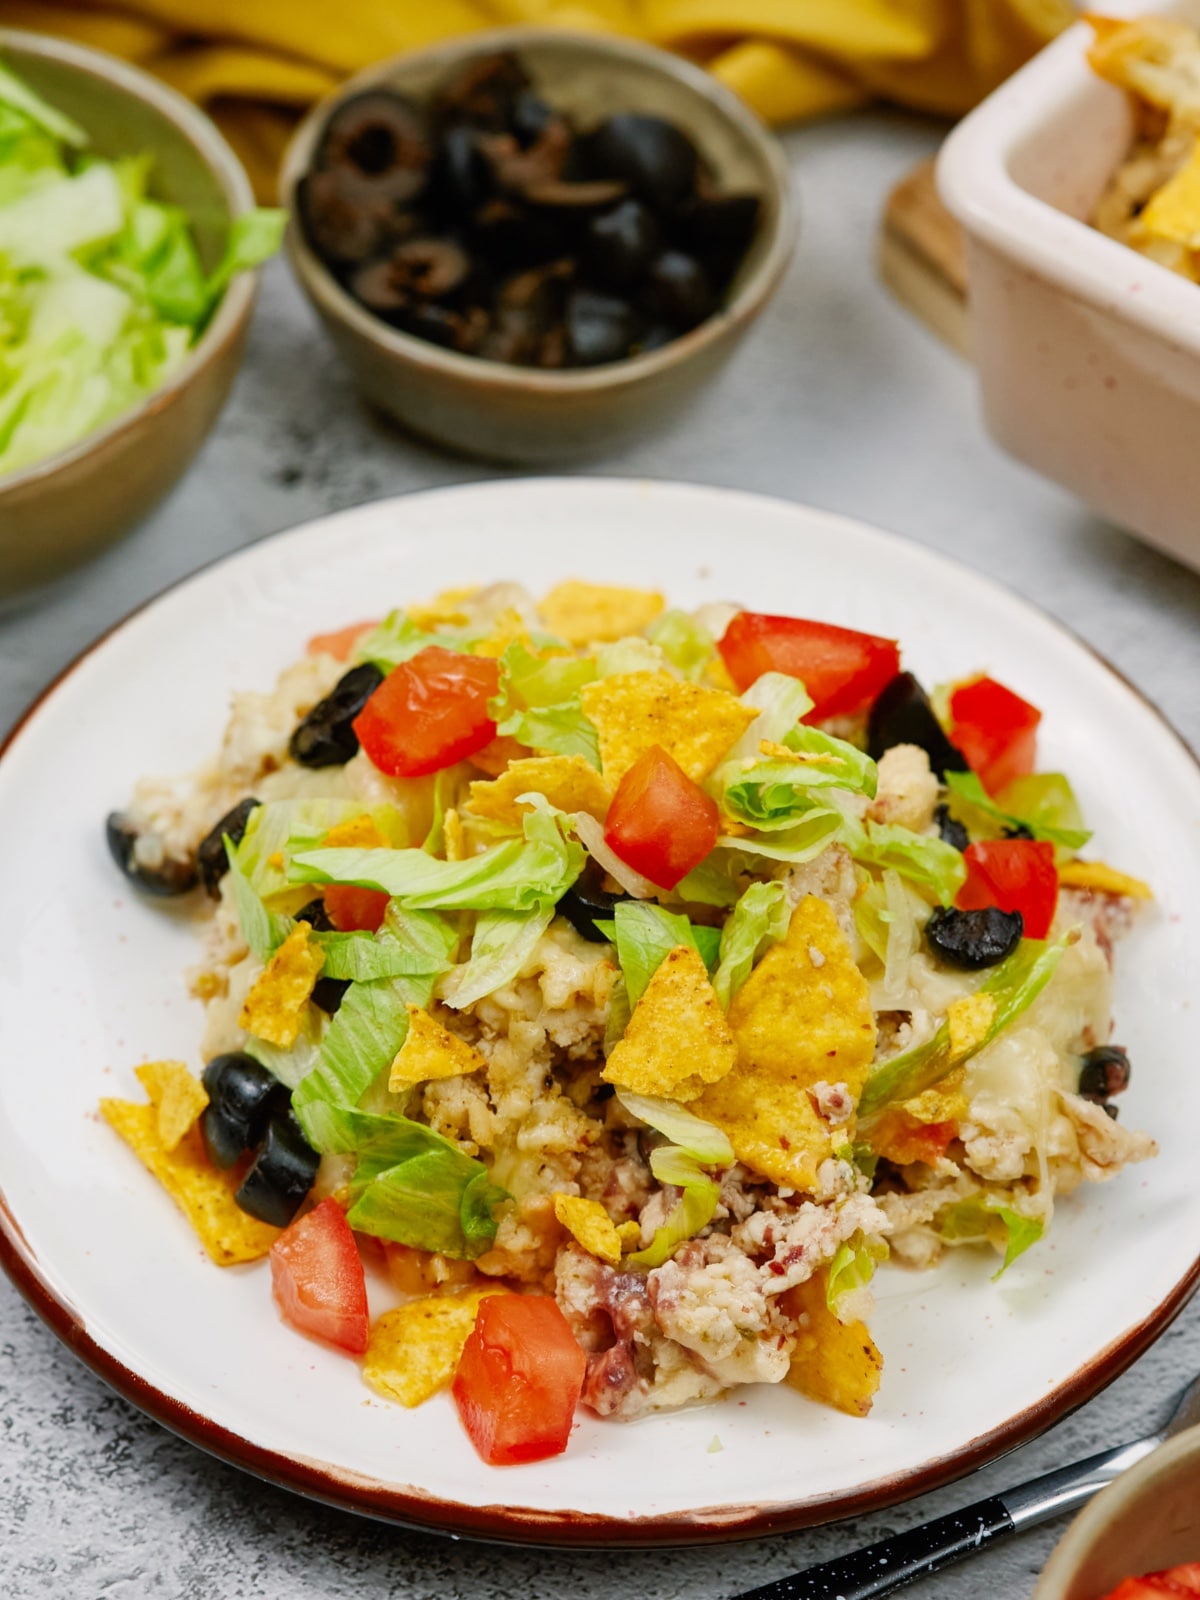 a plate of casserole topped with tortilla chips, olives, lettuce, and tomatoes